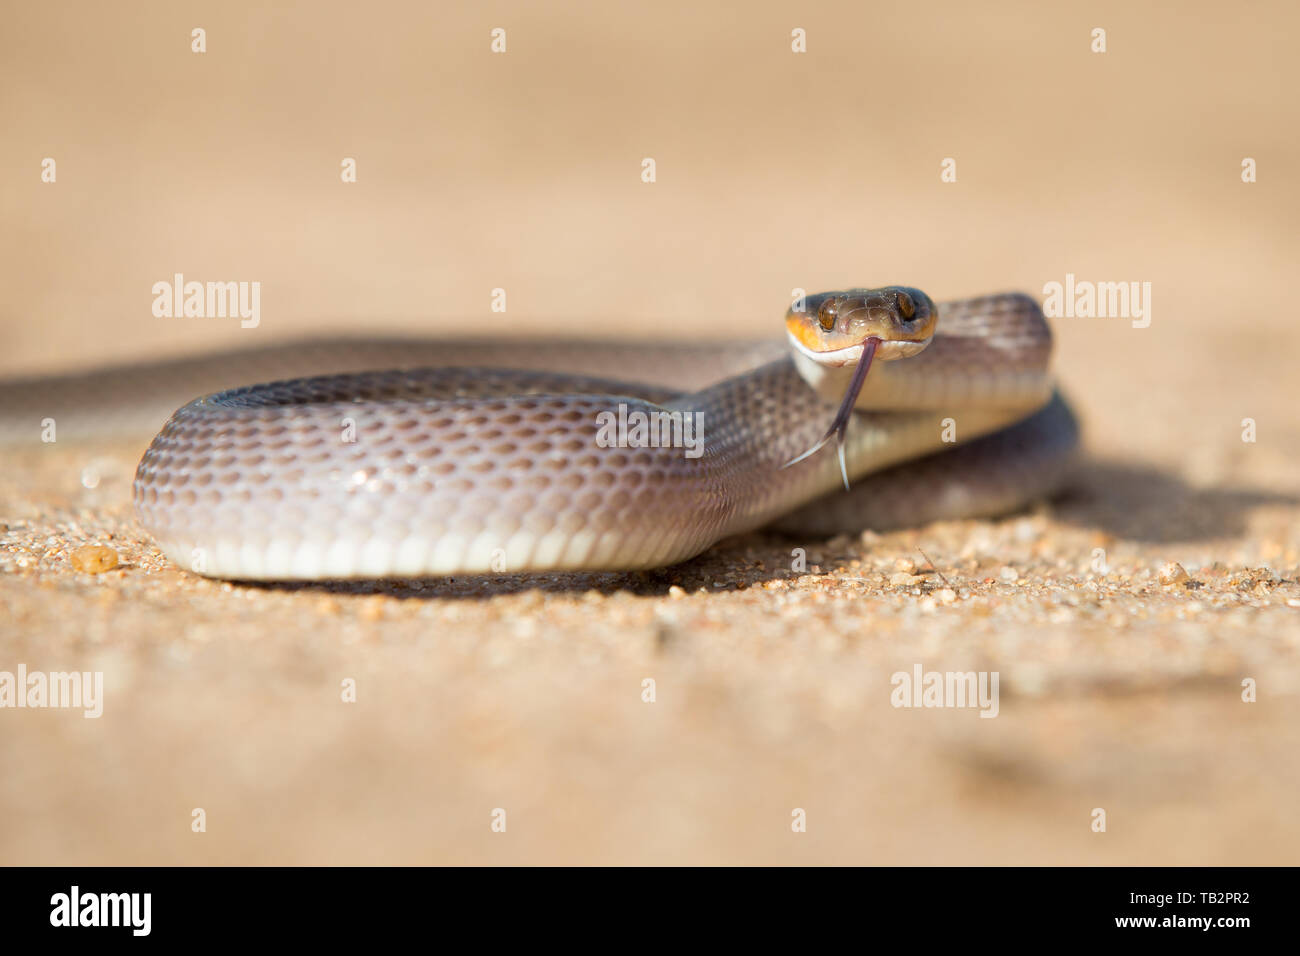 A herald snake, Crotaphopeltis hotamboeia, coils in the sand, direct gaze with tongue out Stock Photo